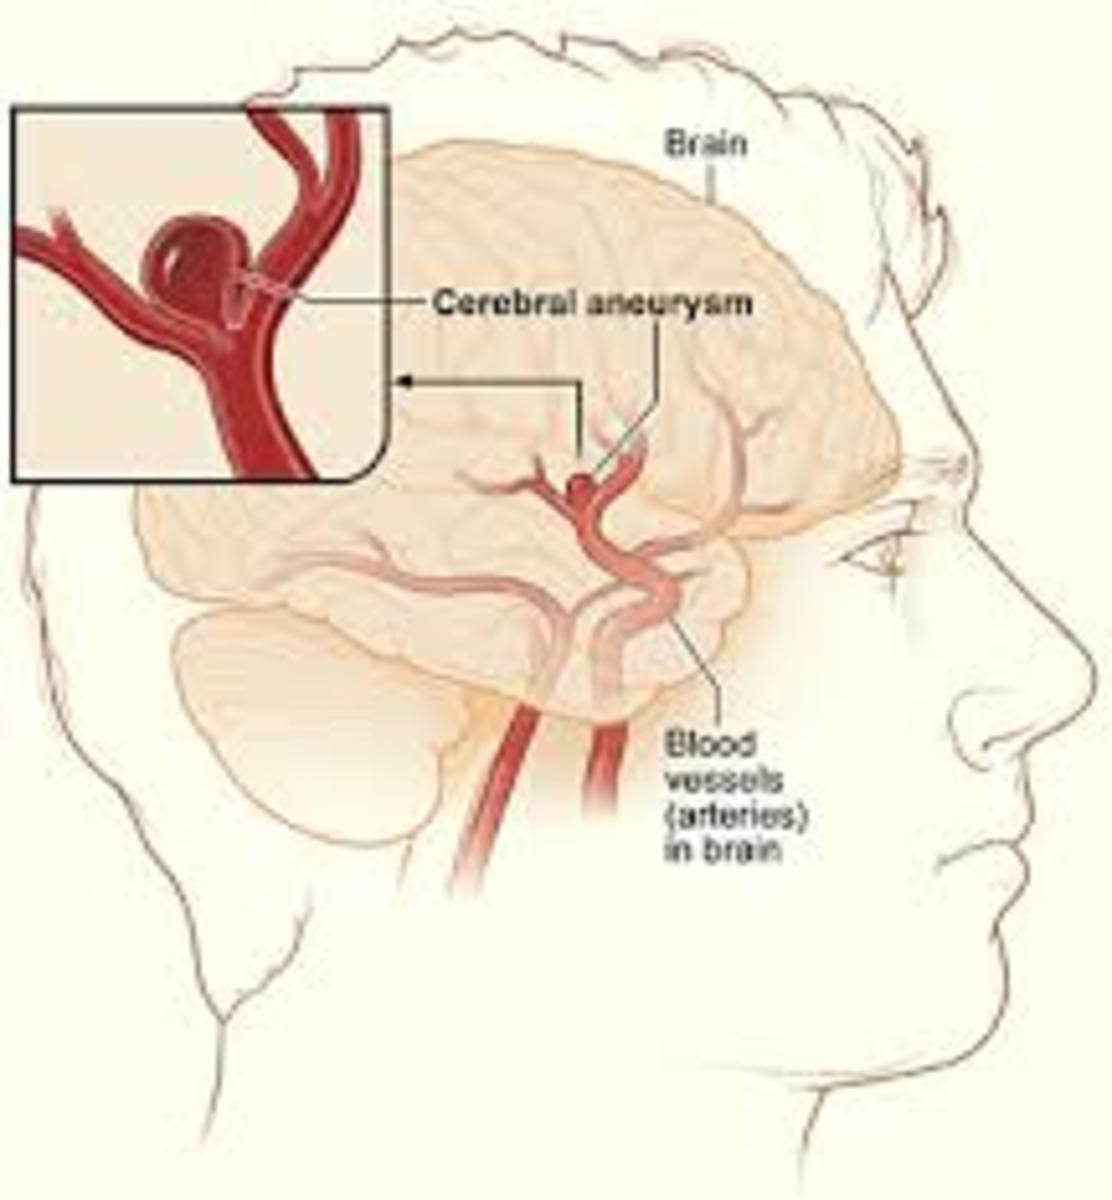 Learn the Signs and Symptoms of Stroke